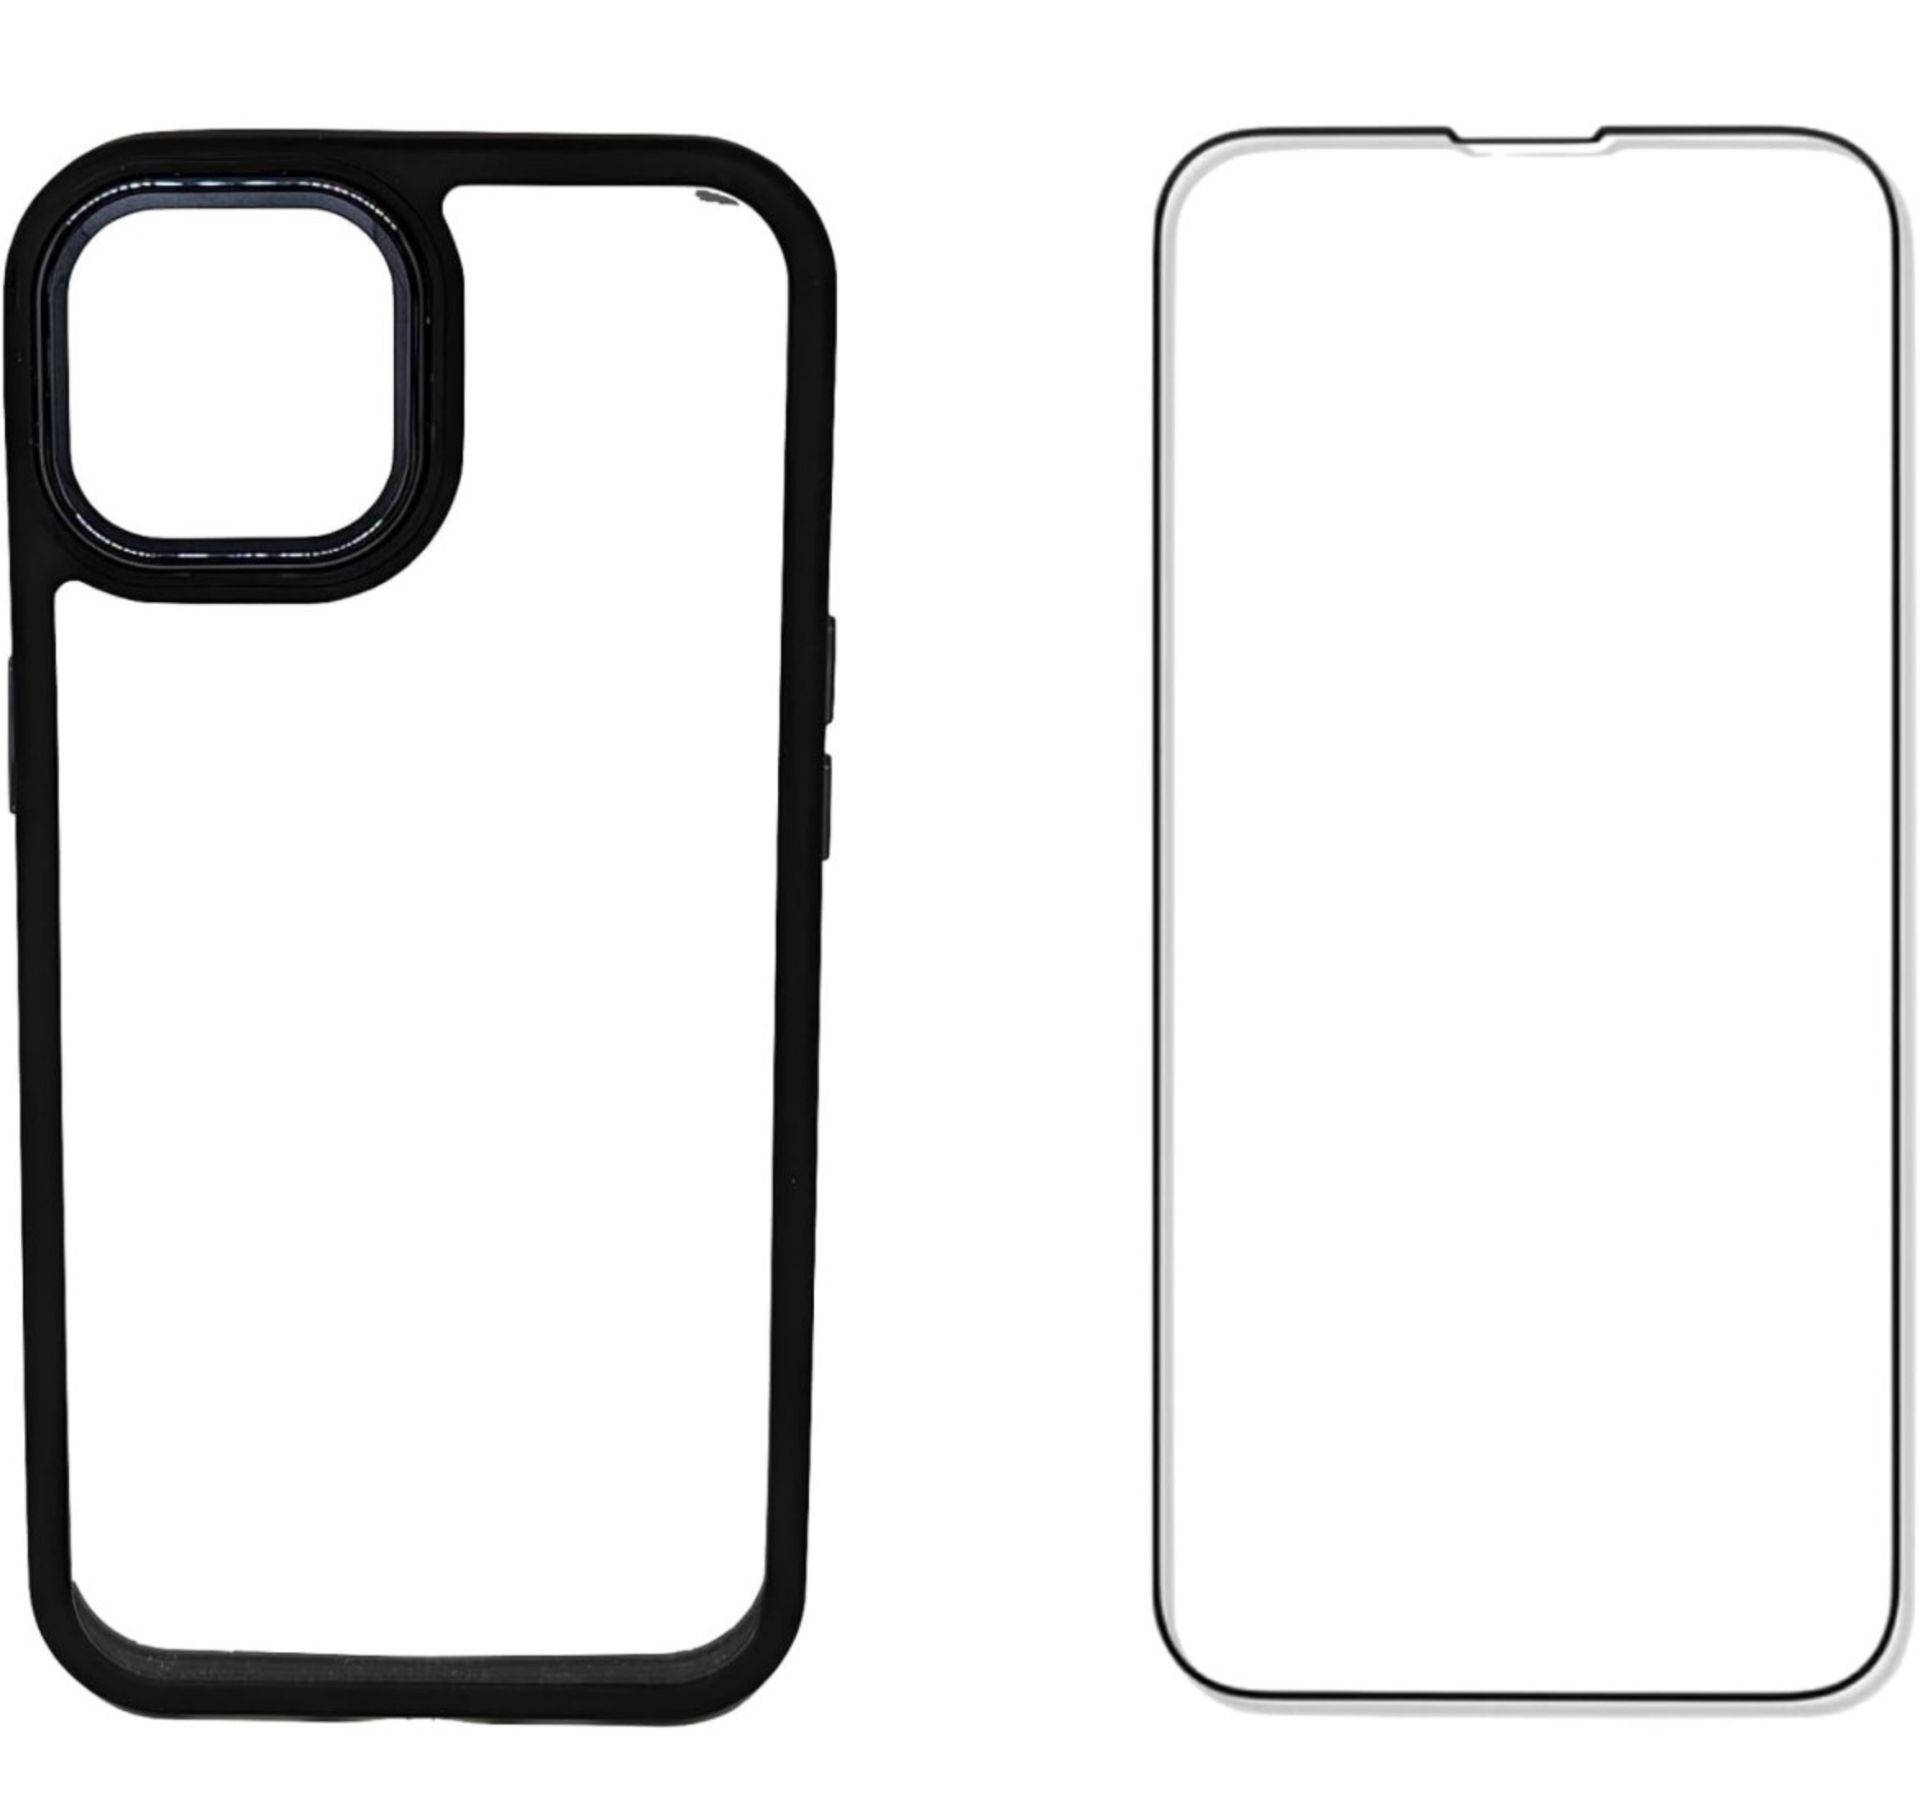 Set Of 100 X Black iPhone Covers With Glass Screen Protectors - Image 3 of 3